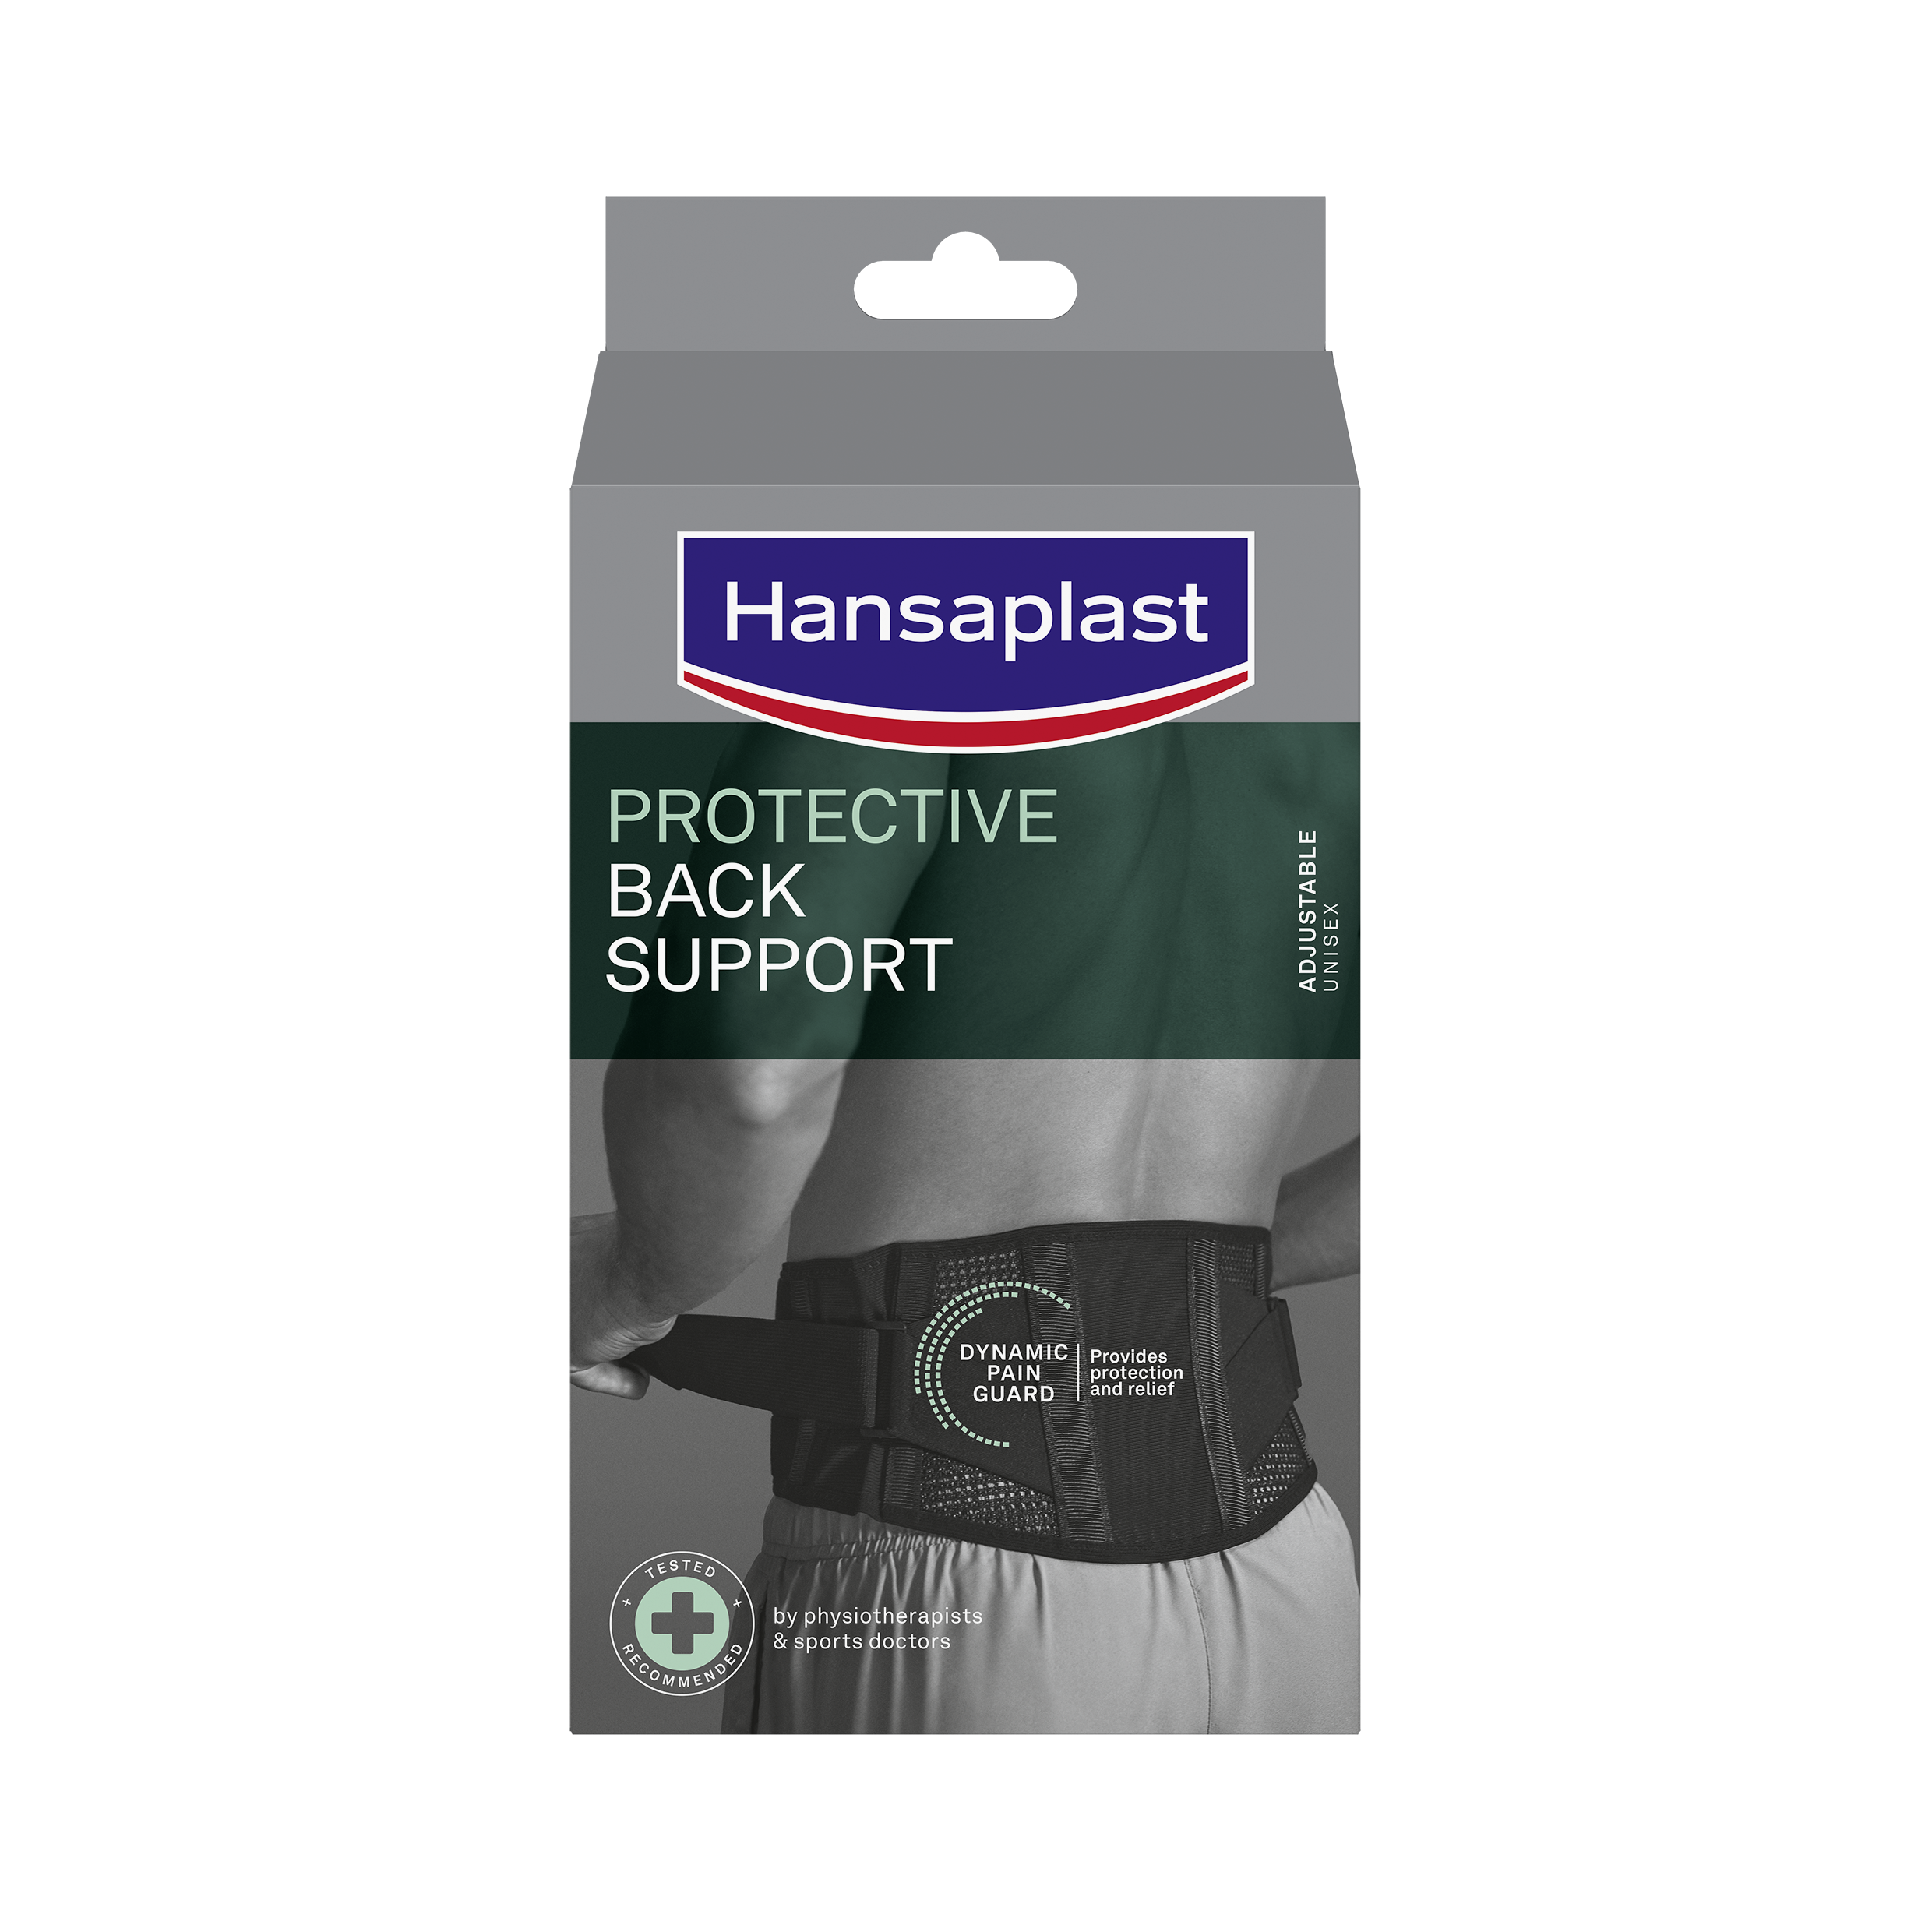 Protective Back Support - Provides protection and pain relief